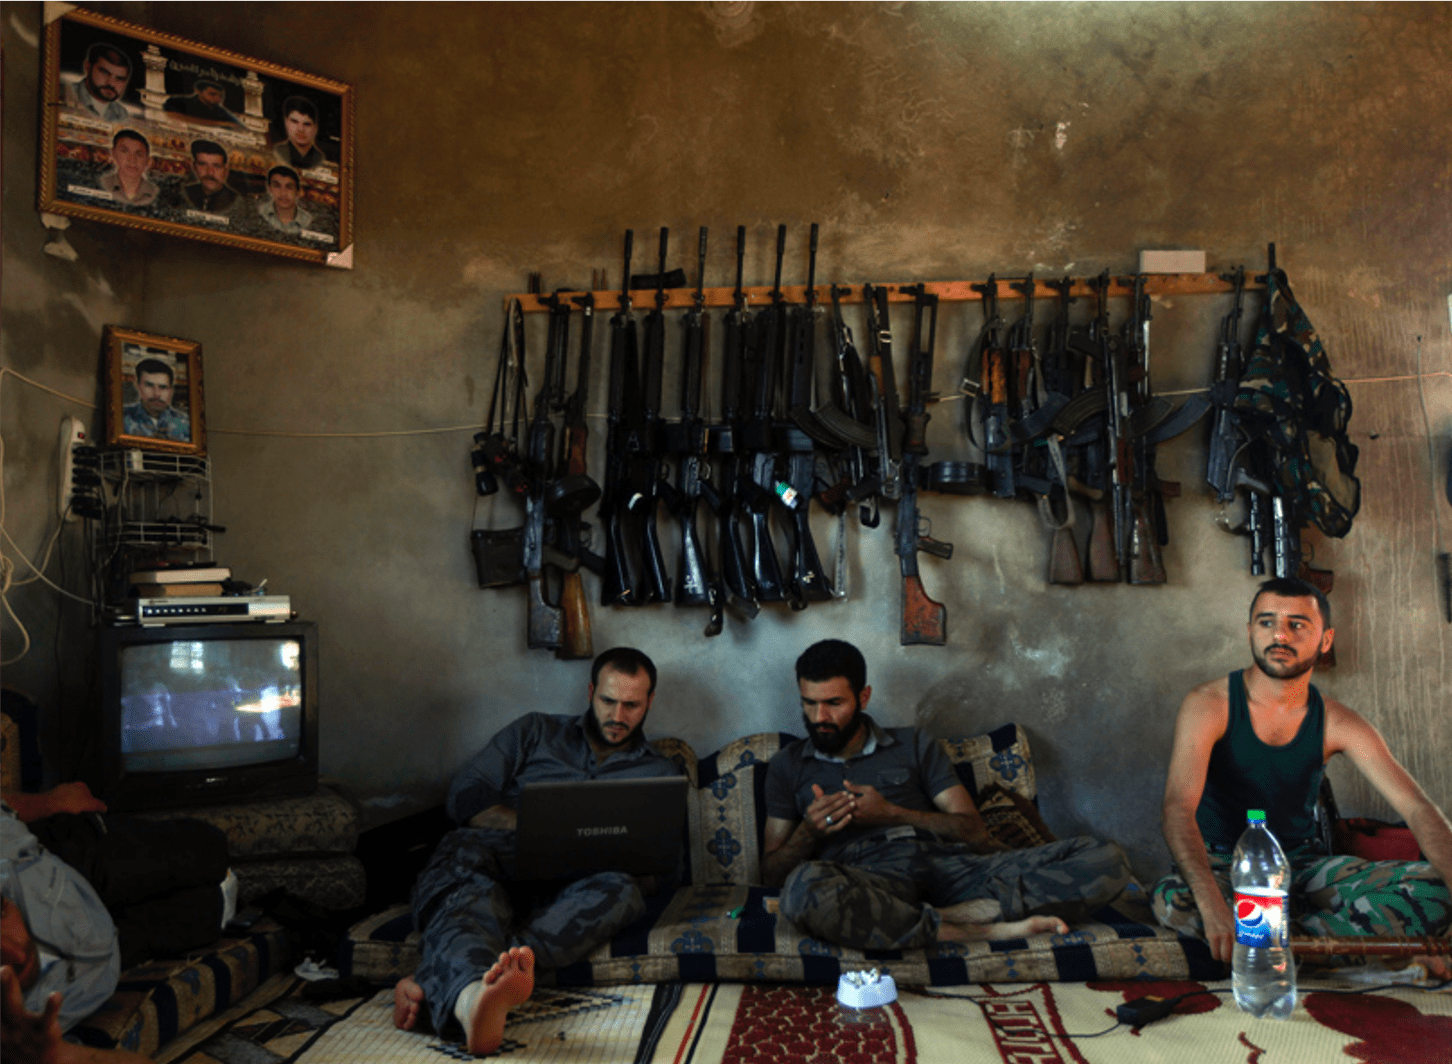 Pulitzer-Winning Photos: Free Syrian Army fighters sit in a house on the outskirts of Aleppo, Syria, June 12, 2012. (Khalil Hamra, Associated Press - June 12, 2012)